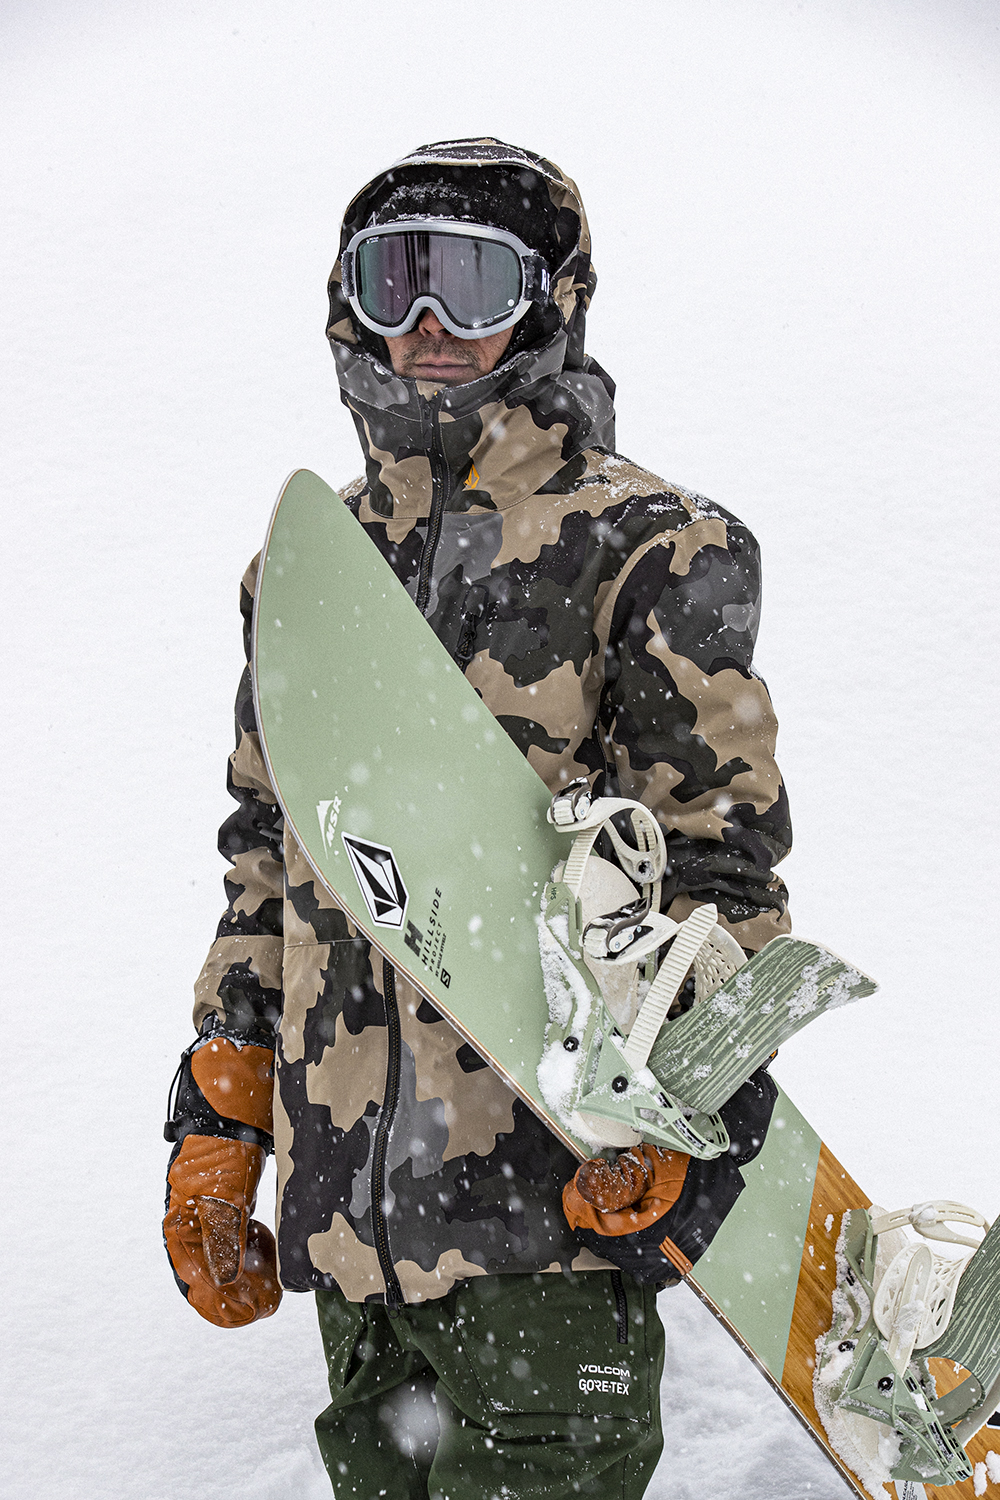 14_ Aiming for a manual snowboard that controls everything by